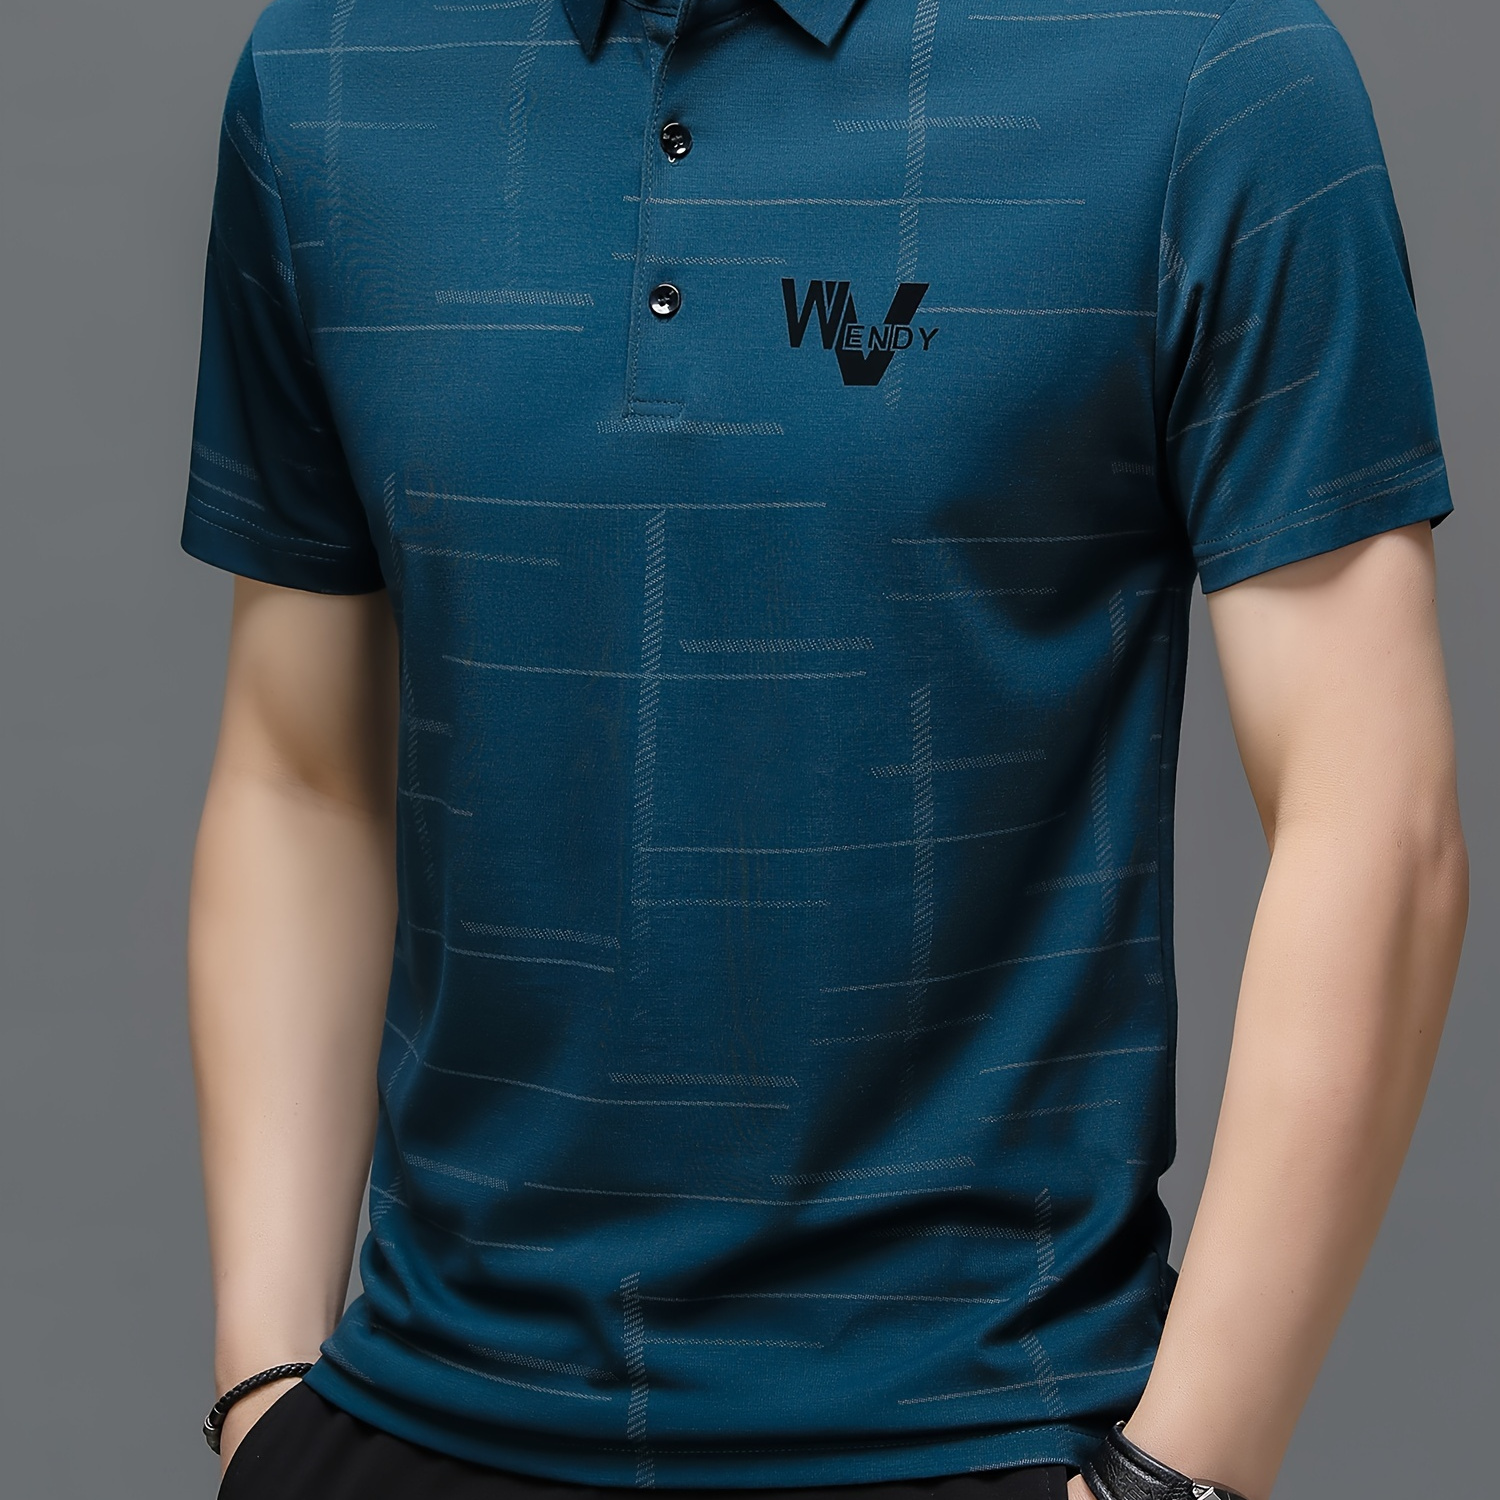 

Men's Irregular Stripe Pattern And Alphabet Print Sports Shirt With Lapel Collar, Henley Neck And Short Sleeve, Classic And Chic Tee For Men, Tops Suitable For Summer Outdoors Activities